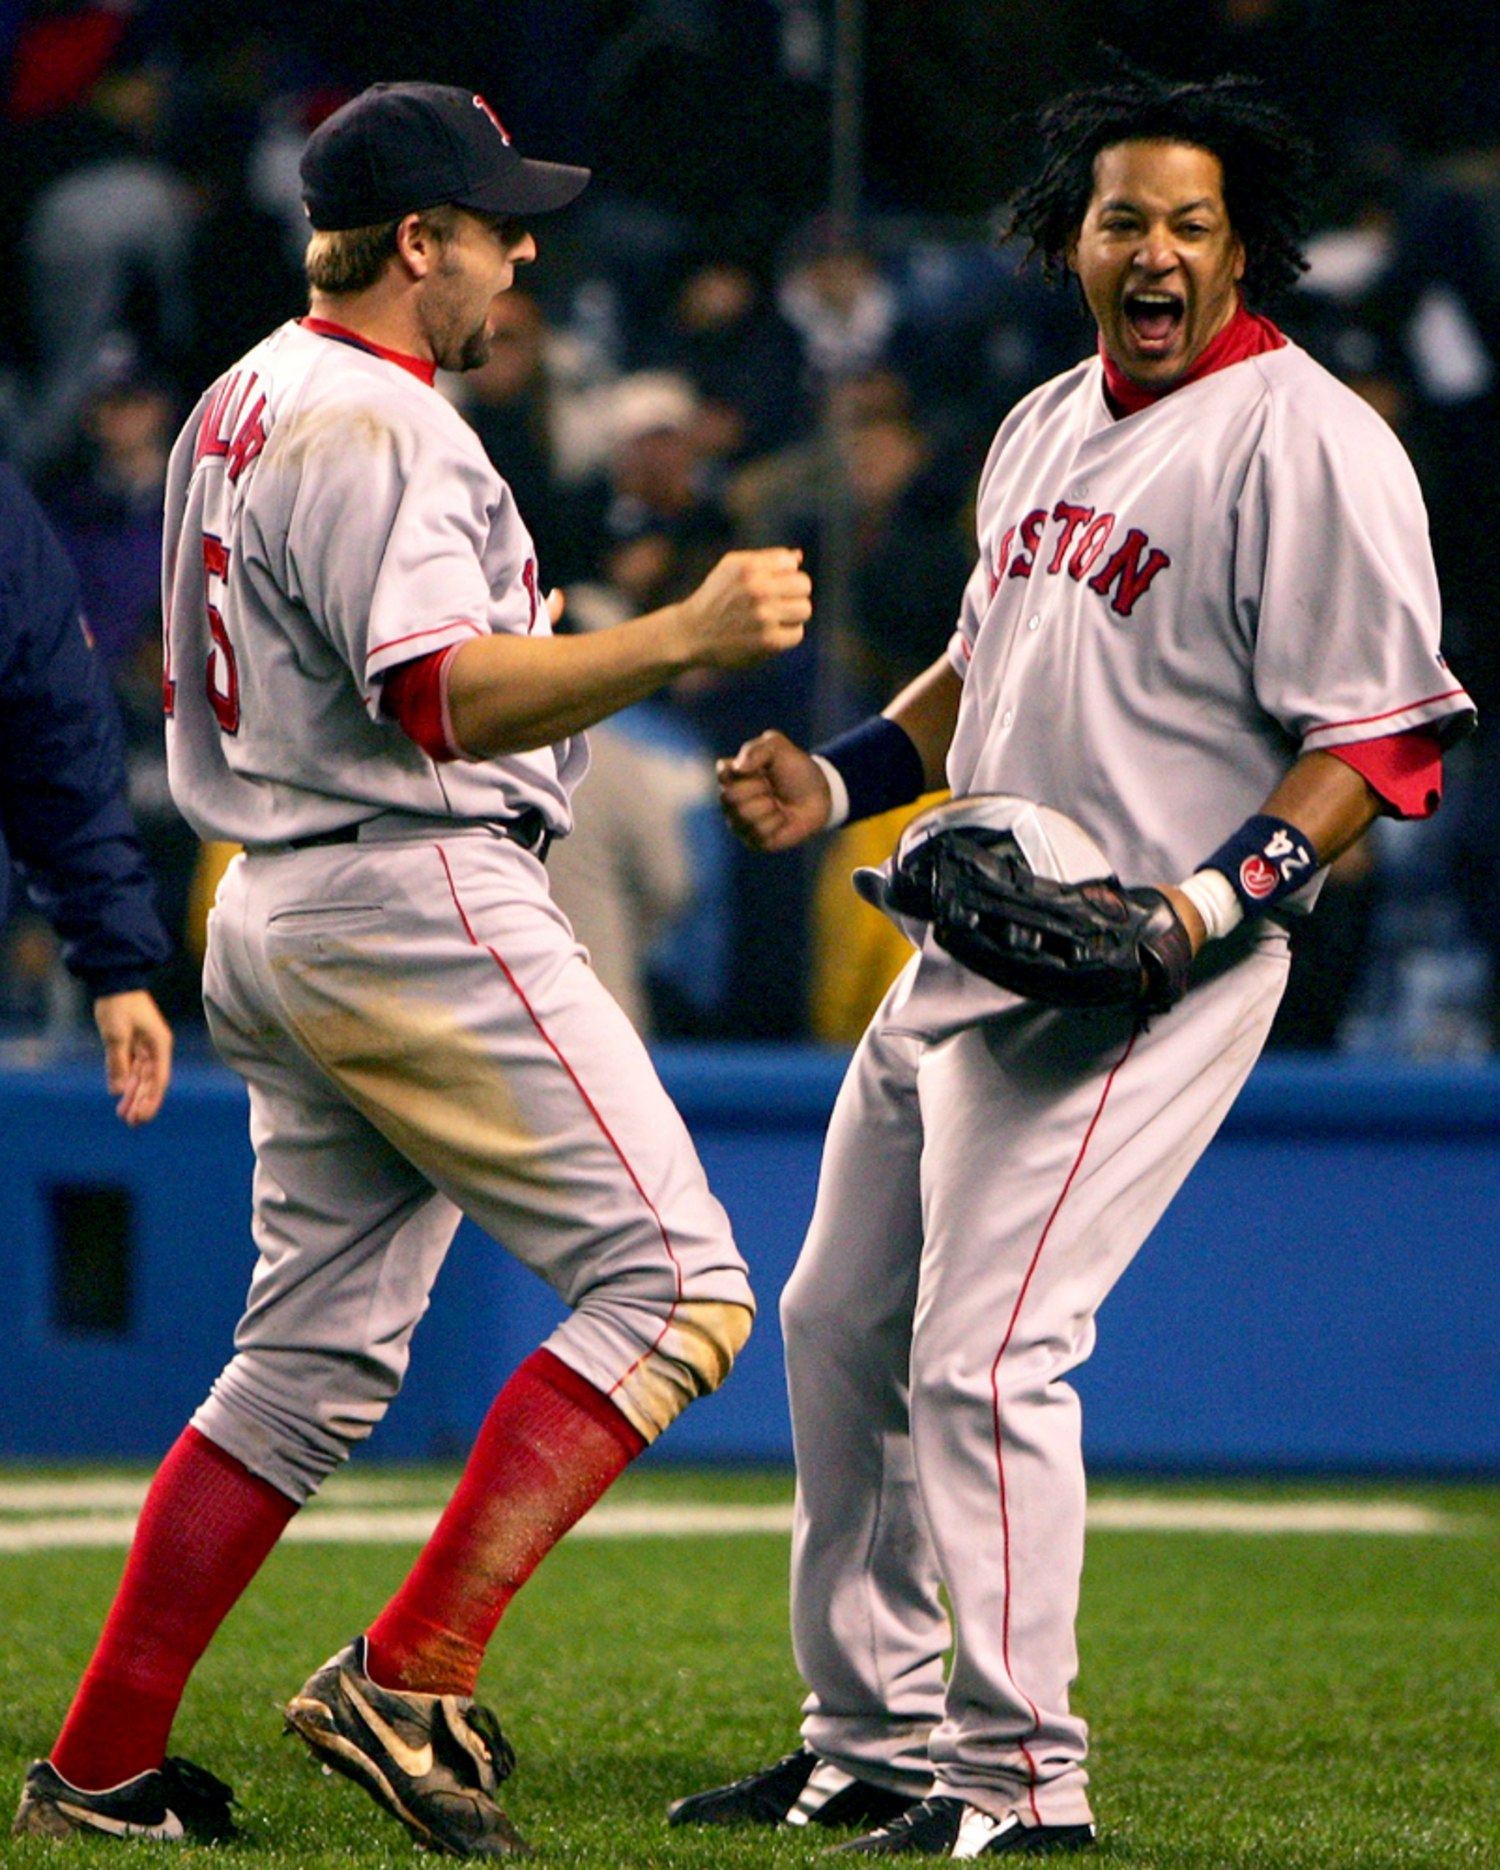 Johnny Damon remembers going to Yankees because the Red Sox weren